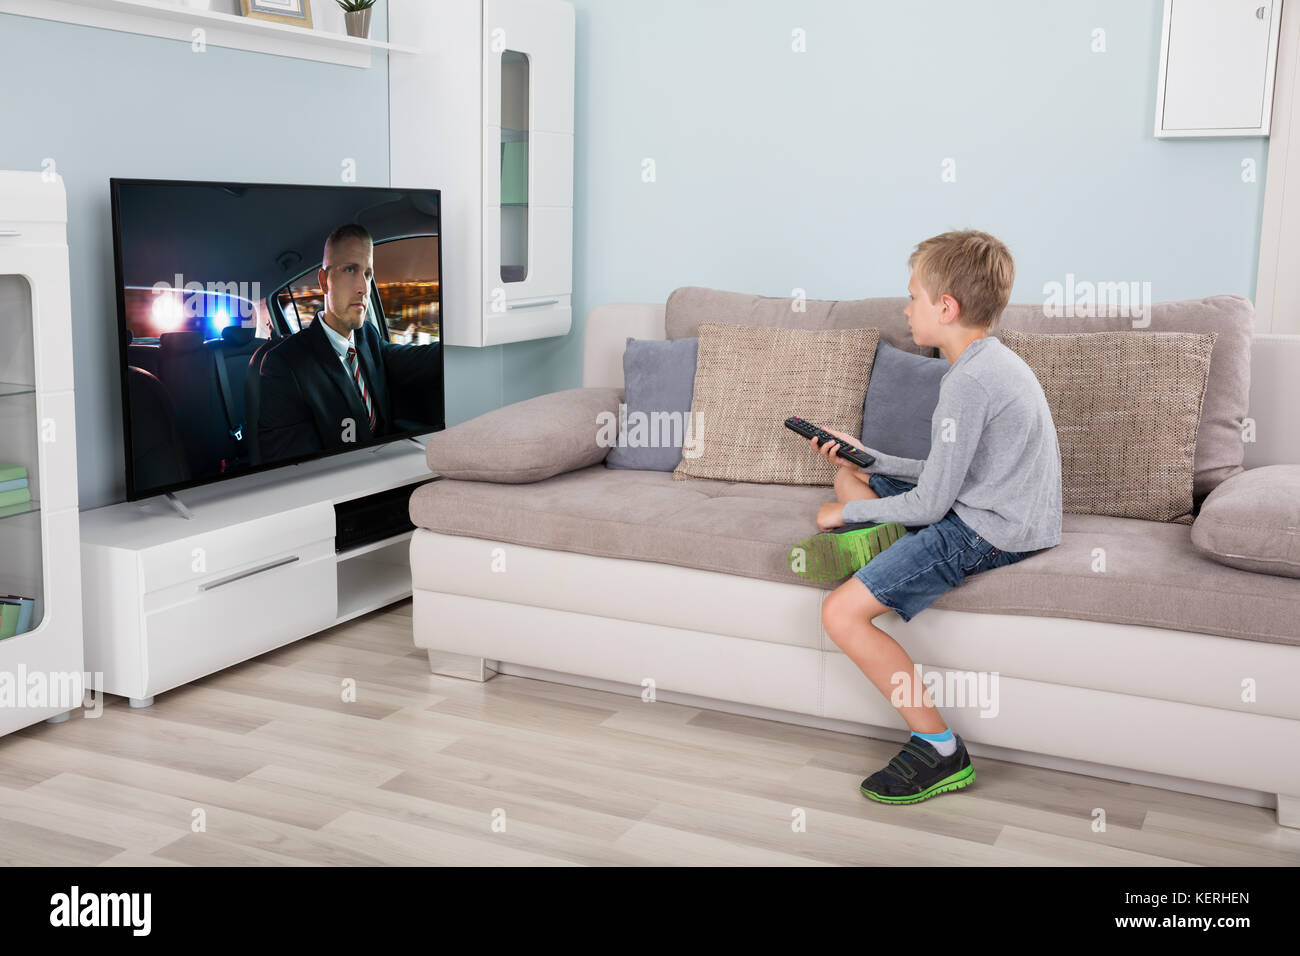 Kid with remote control sitting on couch watching movie on tv Stock Photo